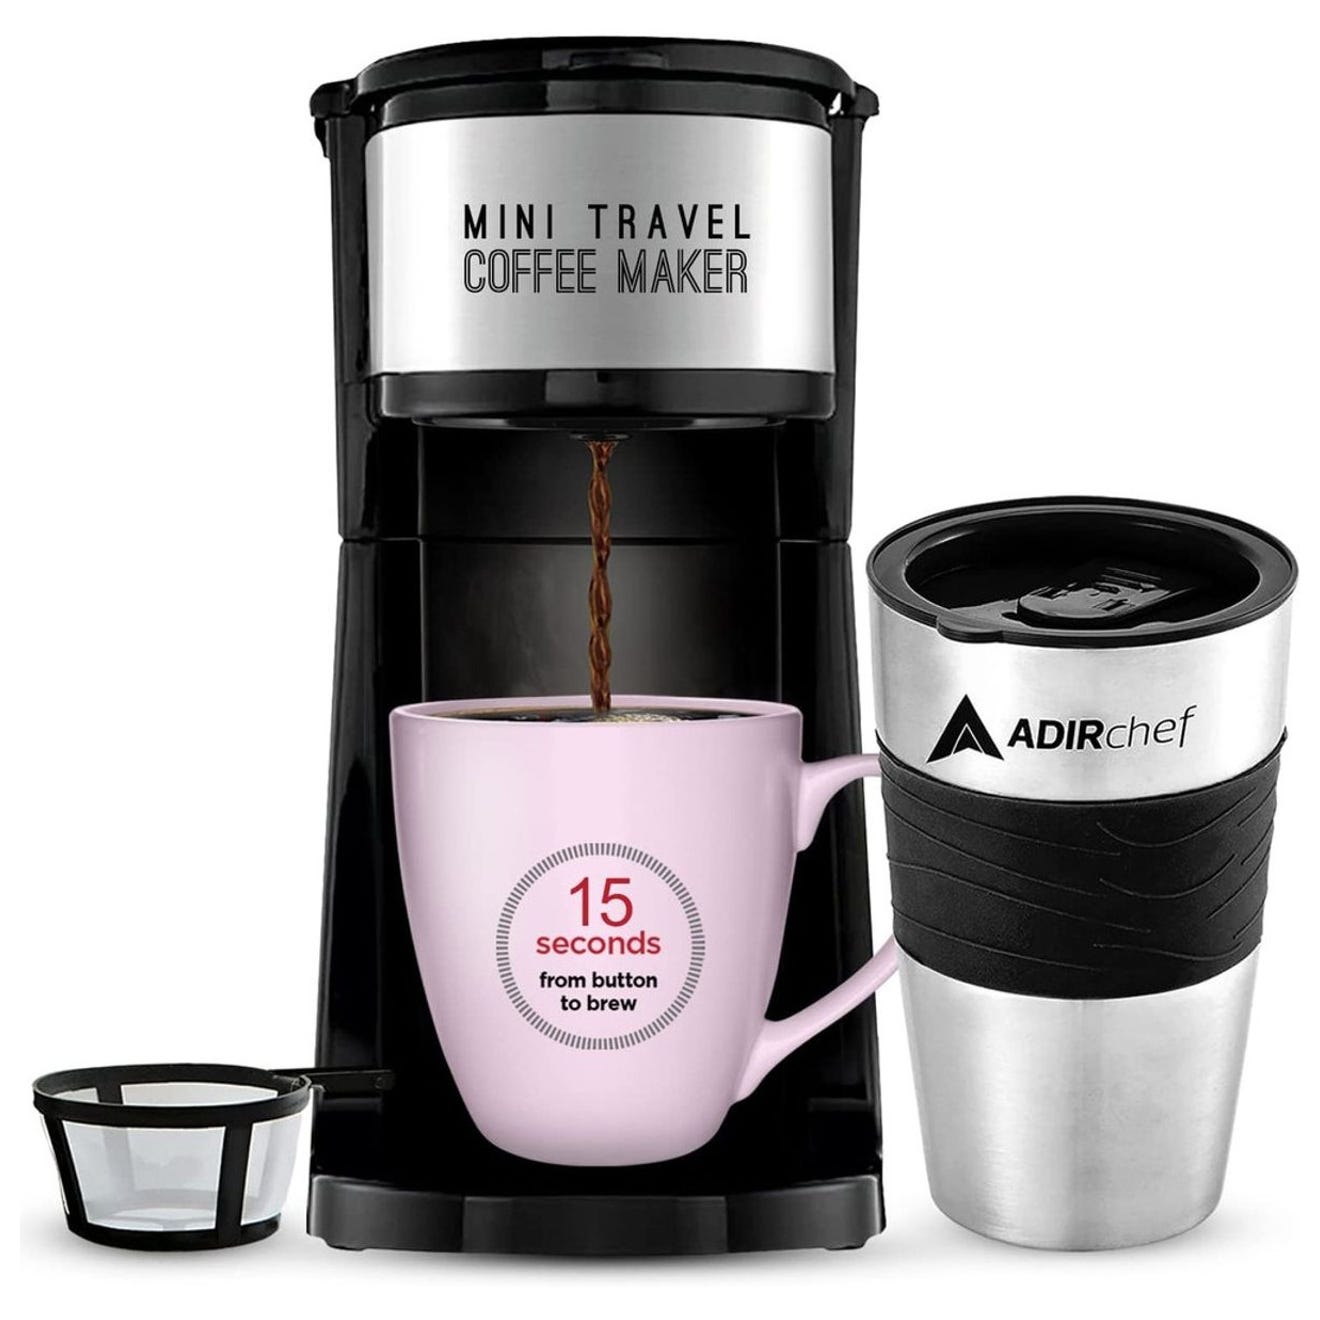 A mini travel coffee maker with a coffee dripping into a pink mug and a separate insulated stainless-steel travel cup.